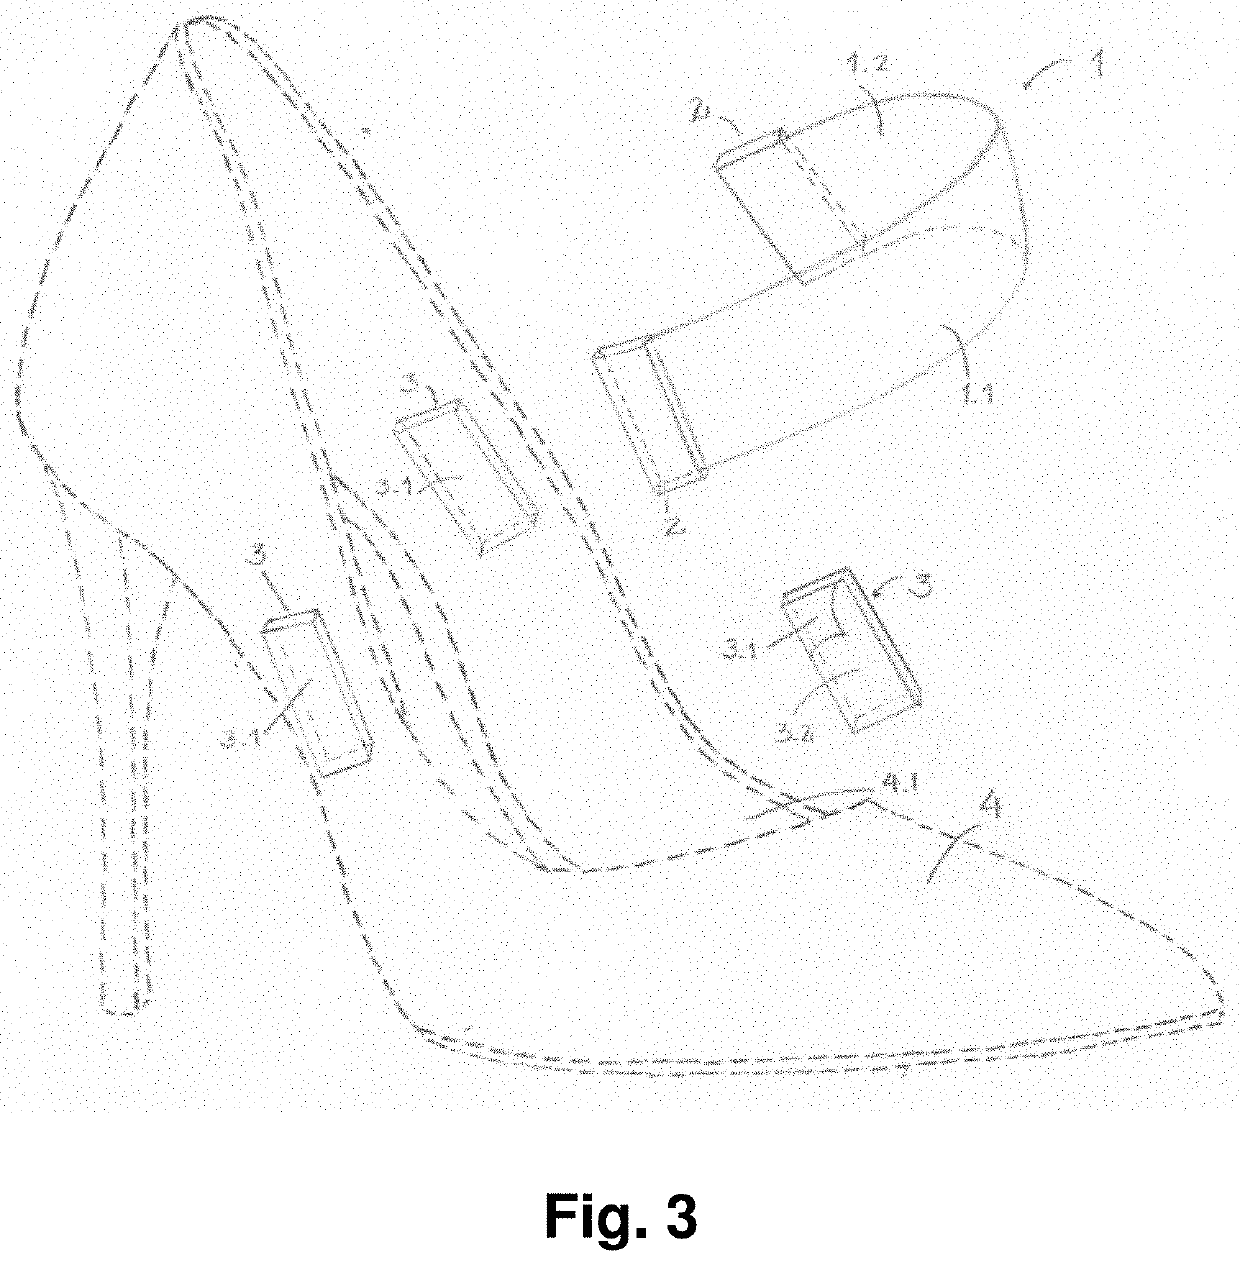 Systems and methods for providing a selectively attachable and multi-functional shoe strap